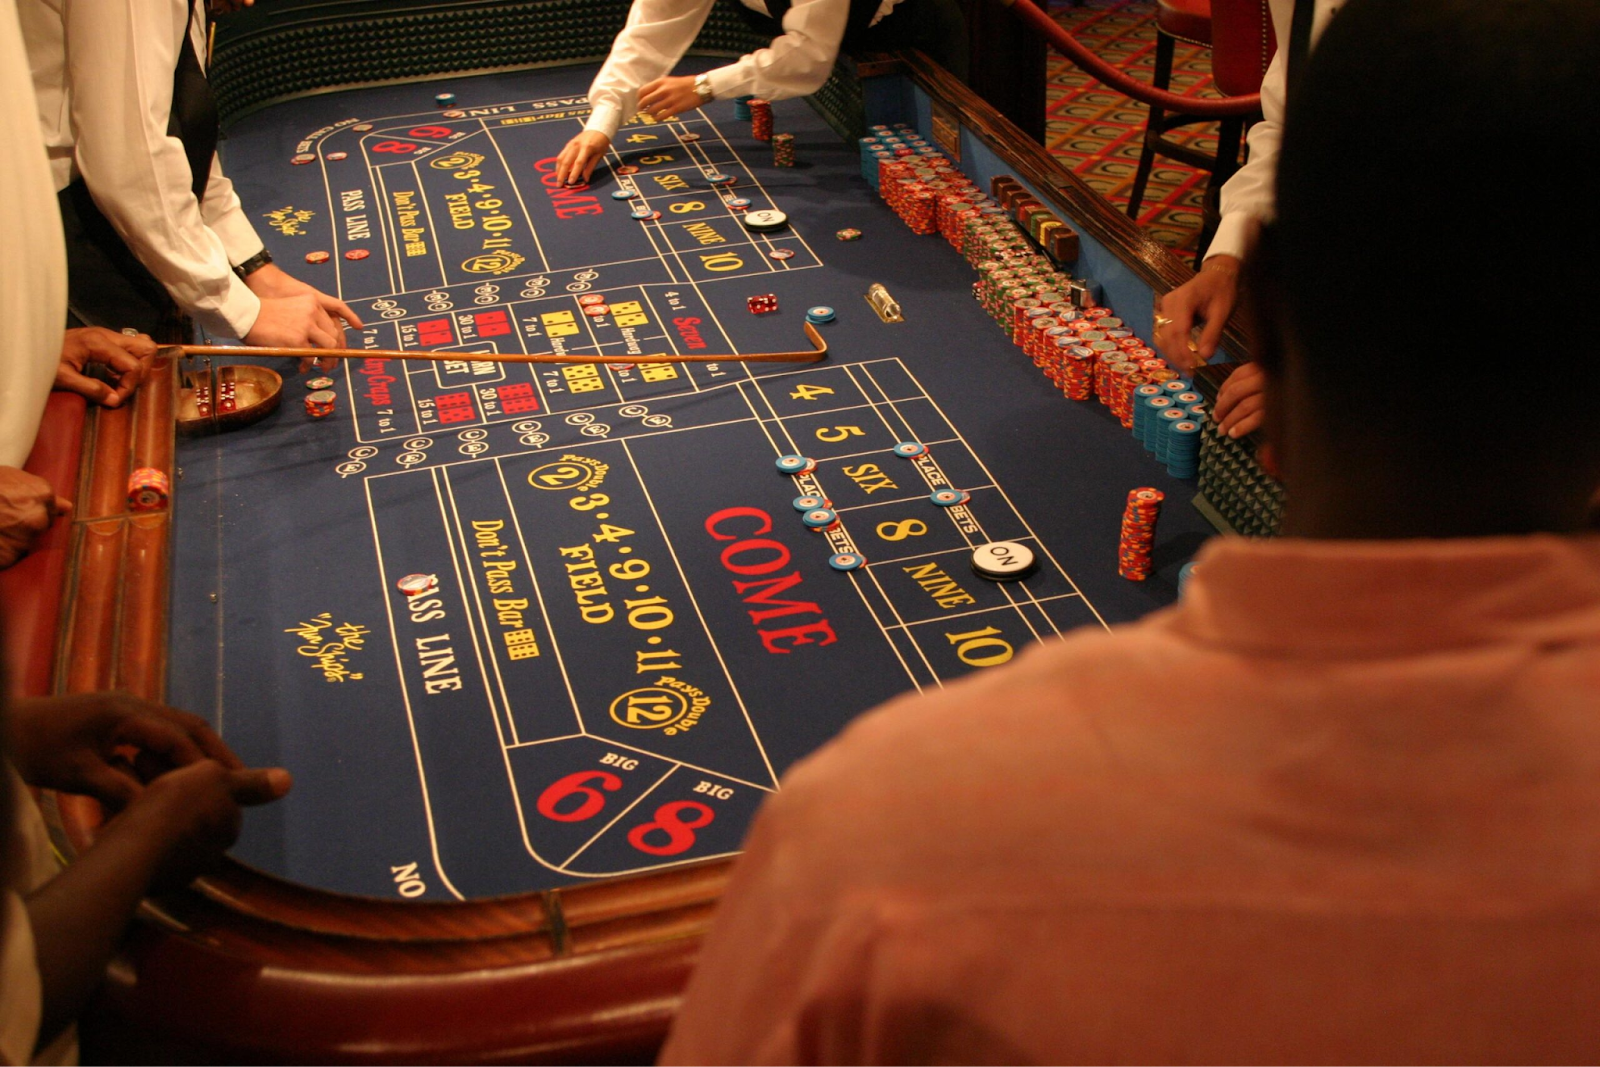 Types of Casino Games: Insider Reveals Top Ones for Guaranteed Excitement